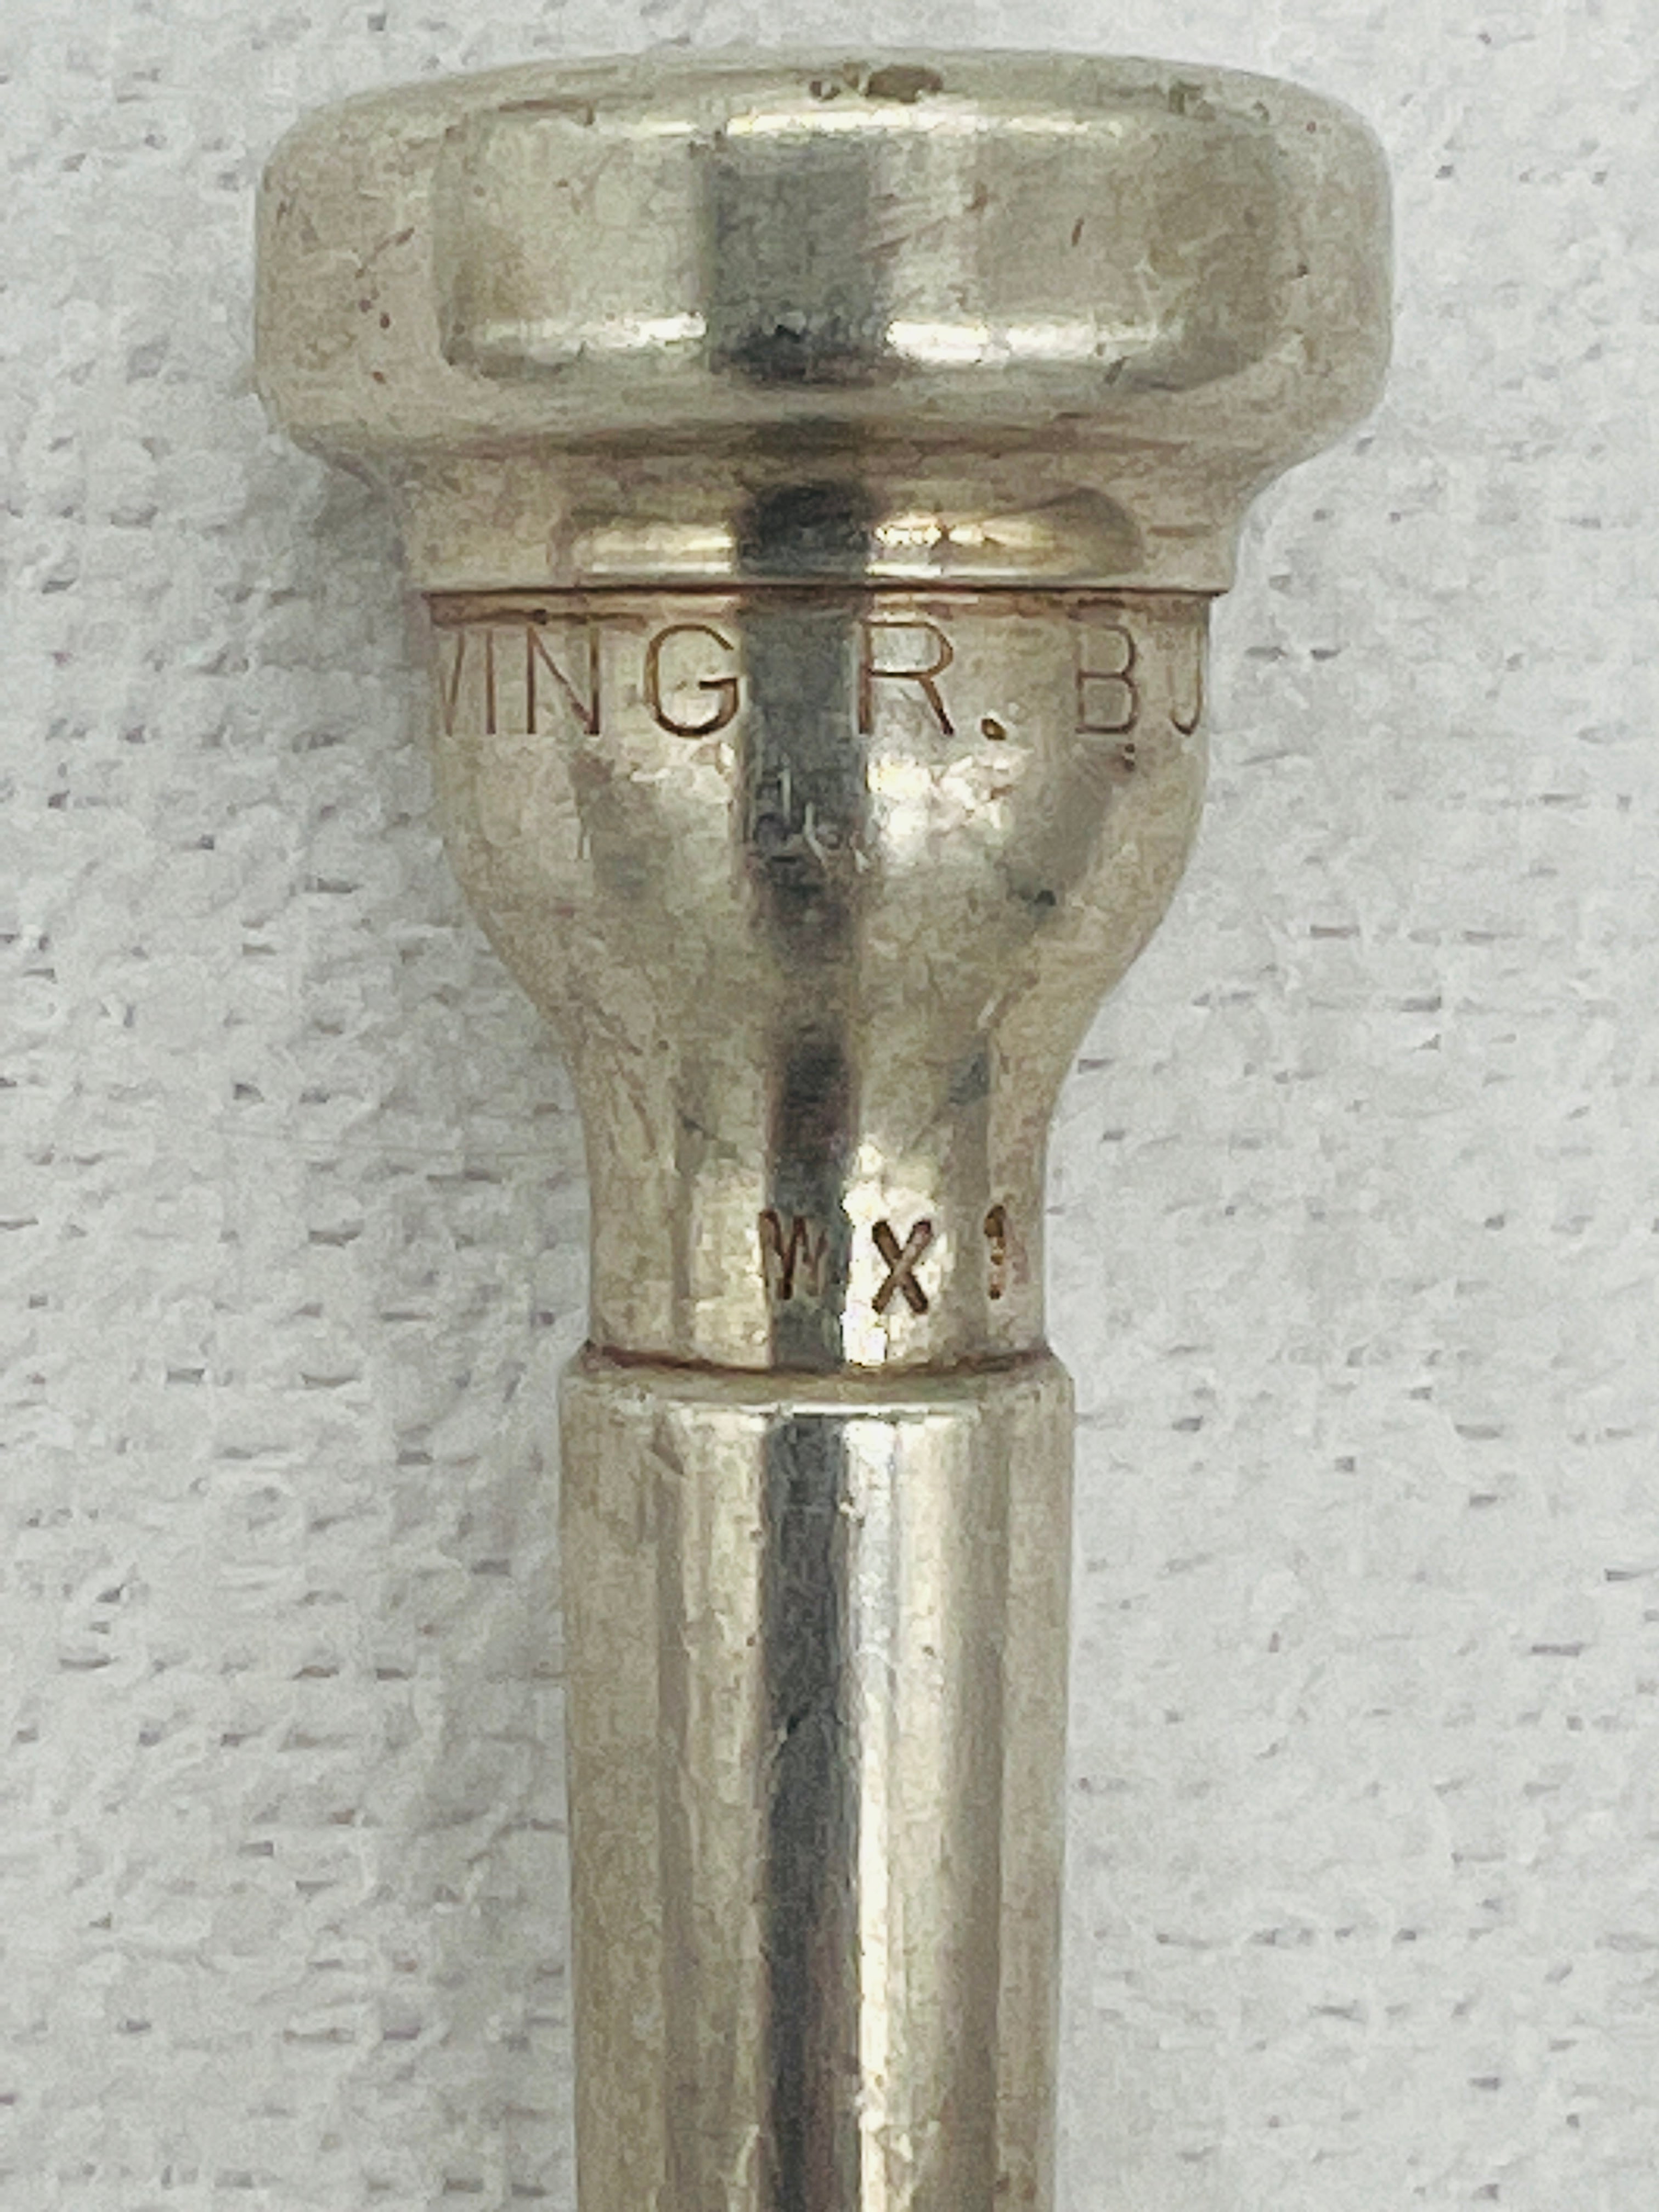 Irving R. BUSH WX1 Trumpet Mouthpiece USED